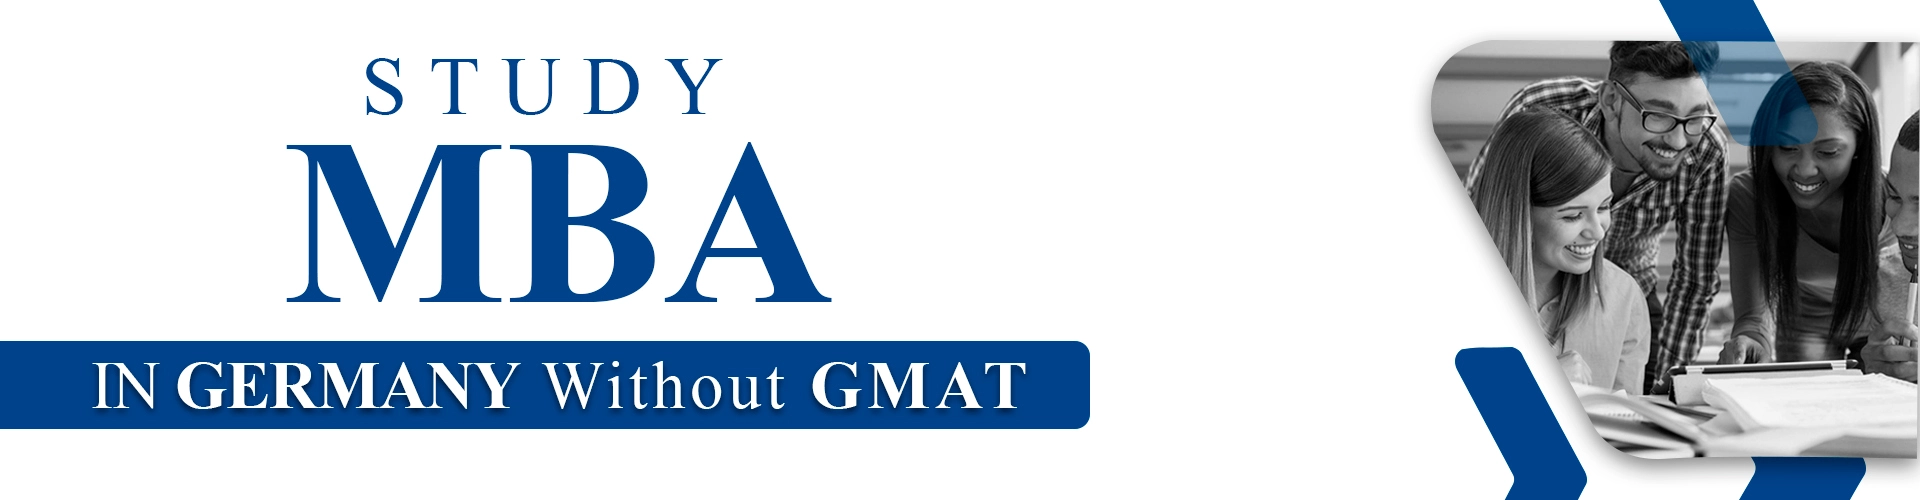 MBA in Germany Without a GMAT